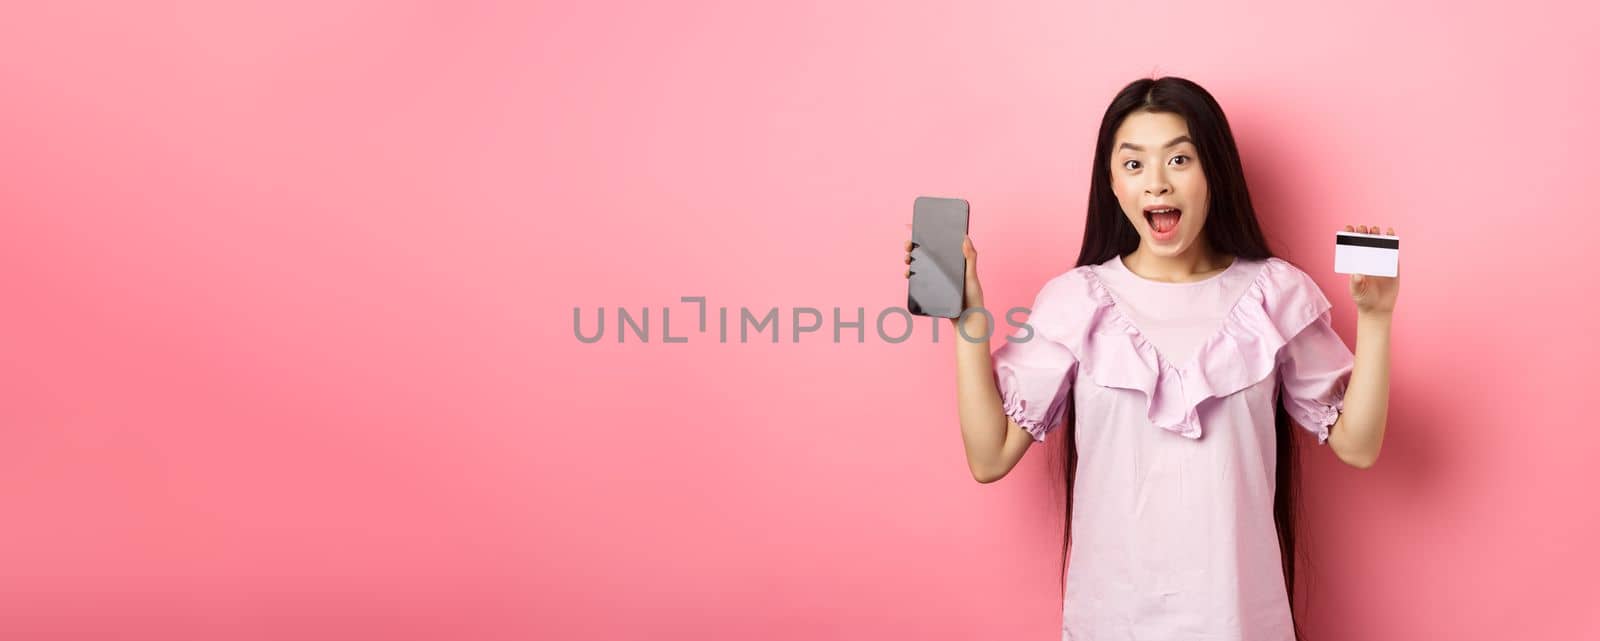 Online shopping. Excited asian woman showing plastic credit card with empty smartphone screen, advertising internet shop, standing on pink background.